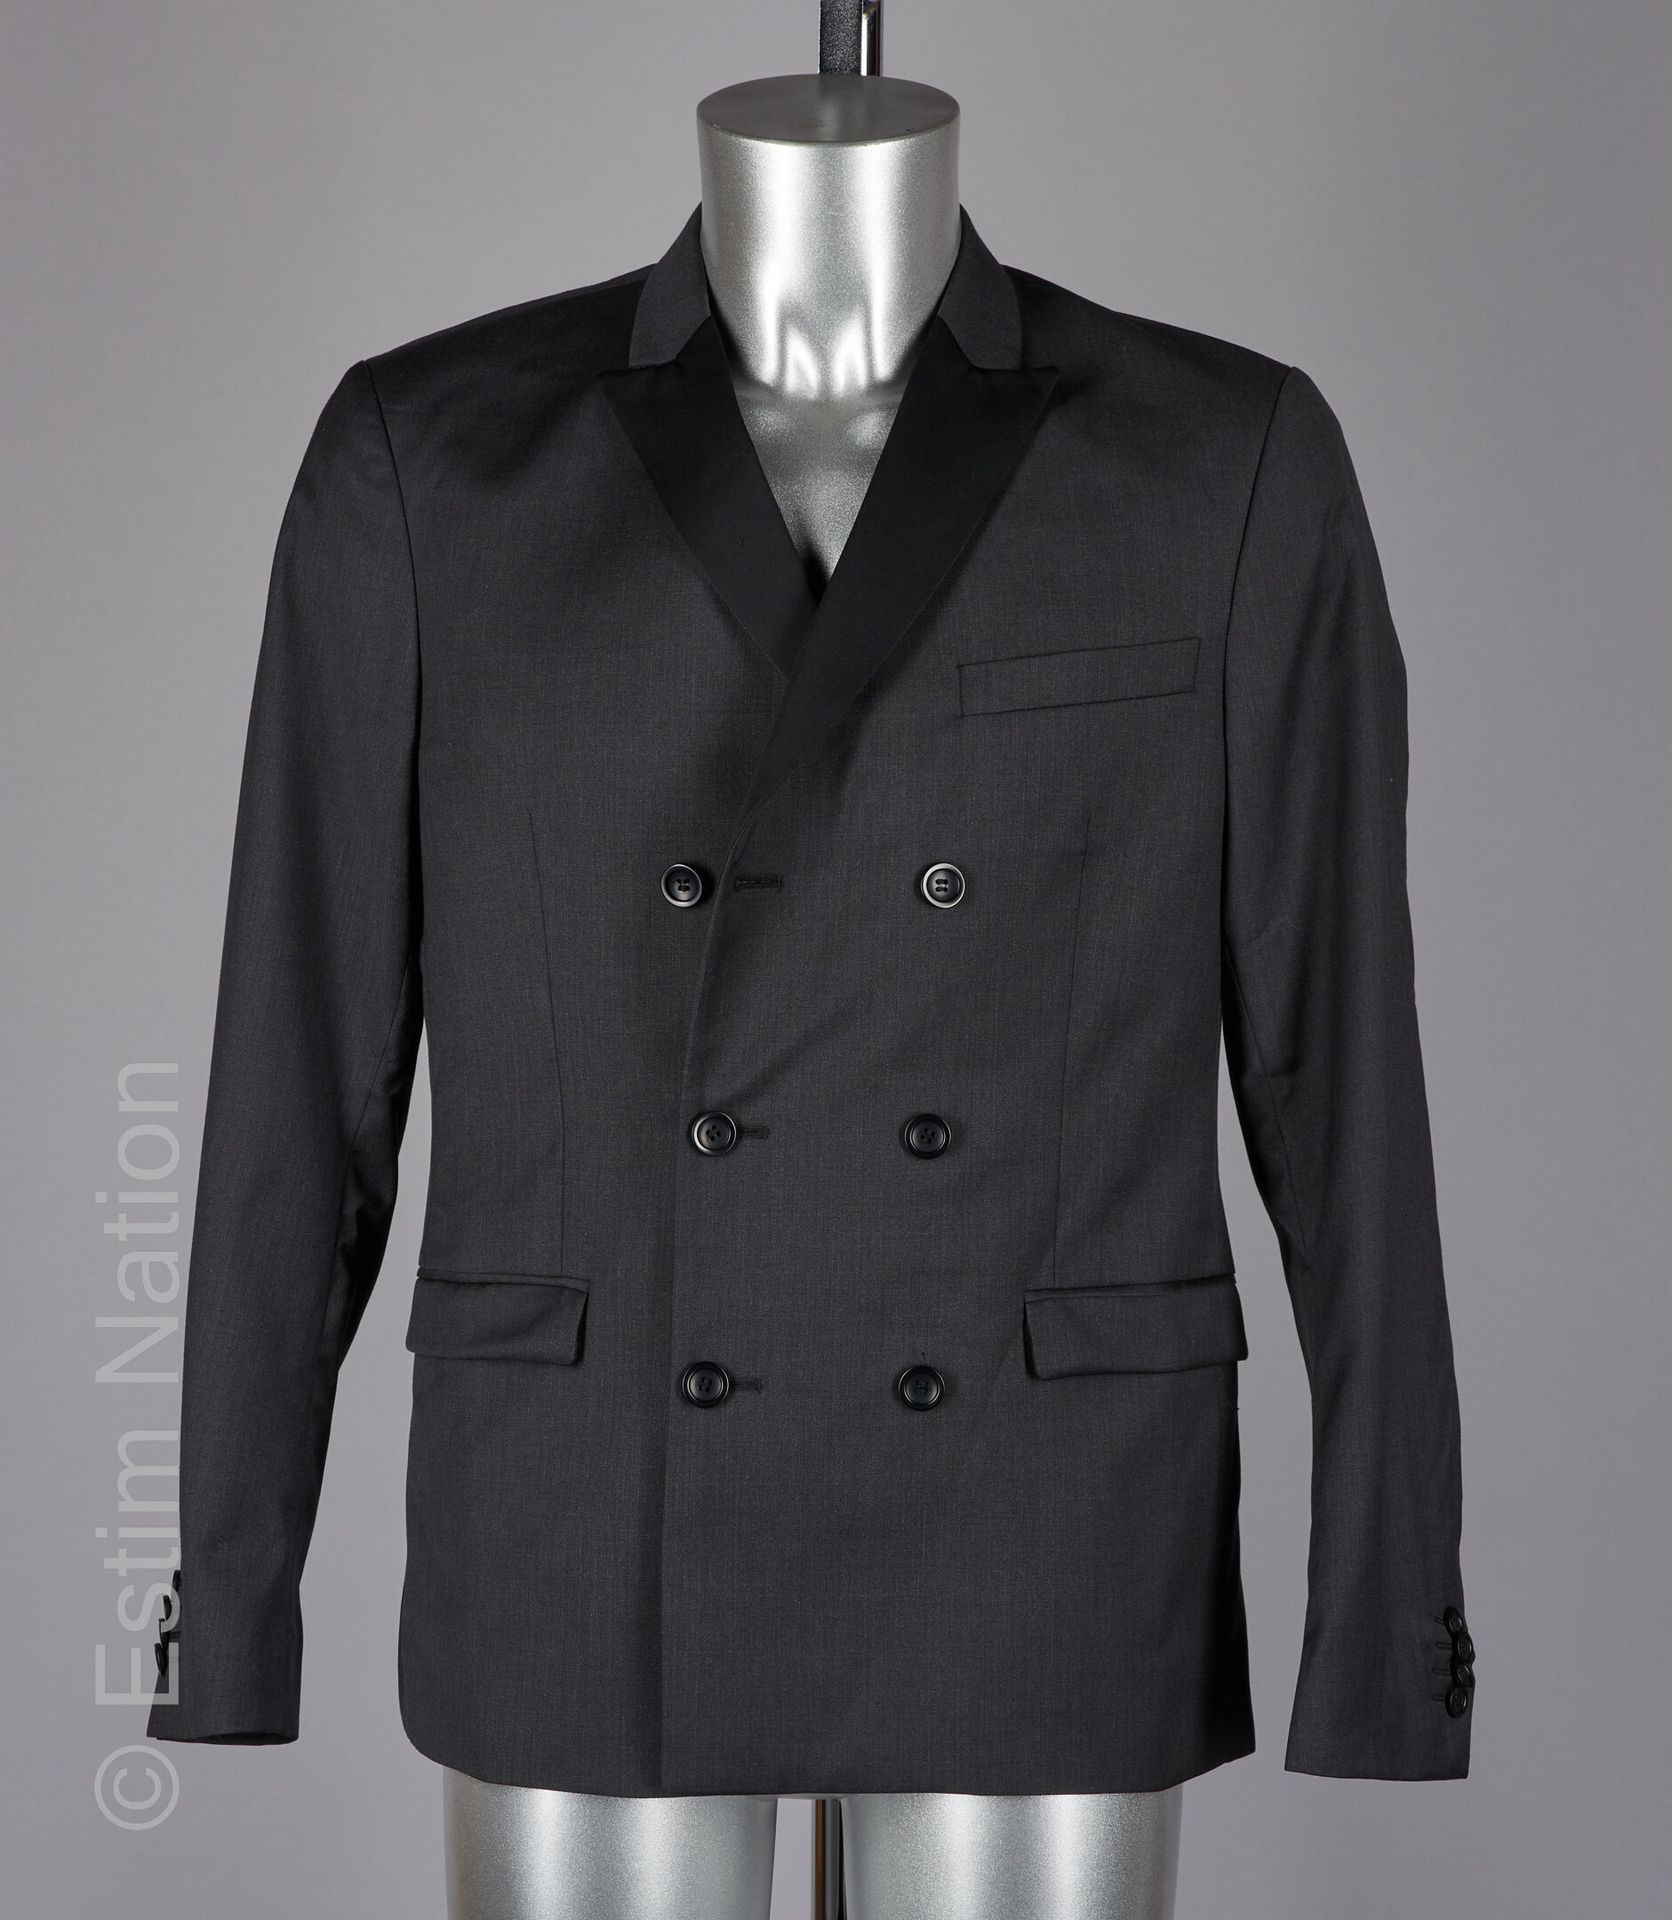 TIGER OF SWEDEN Tuxedo-inspired BLAZER in charcoal wool, satin collar (S 46)